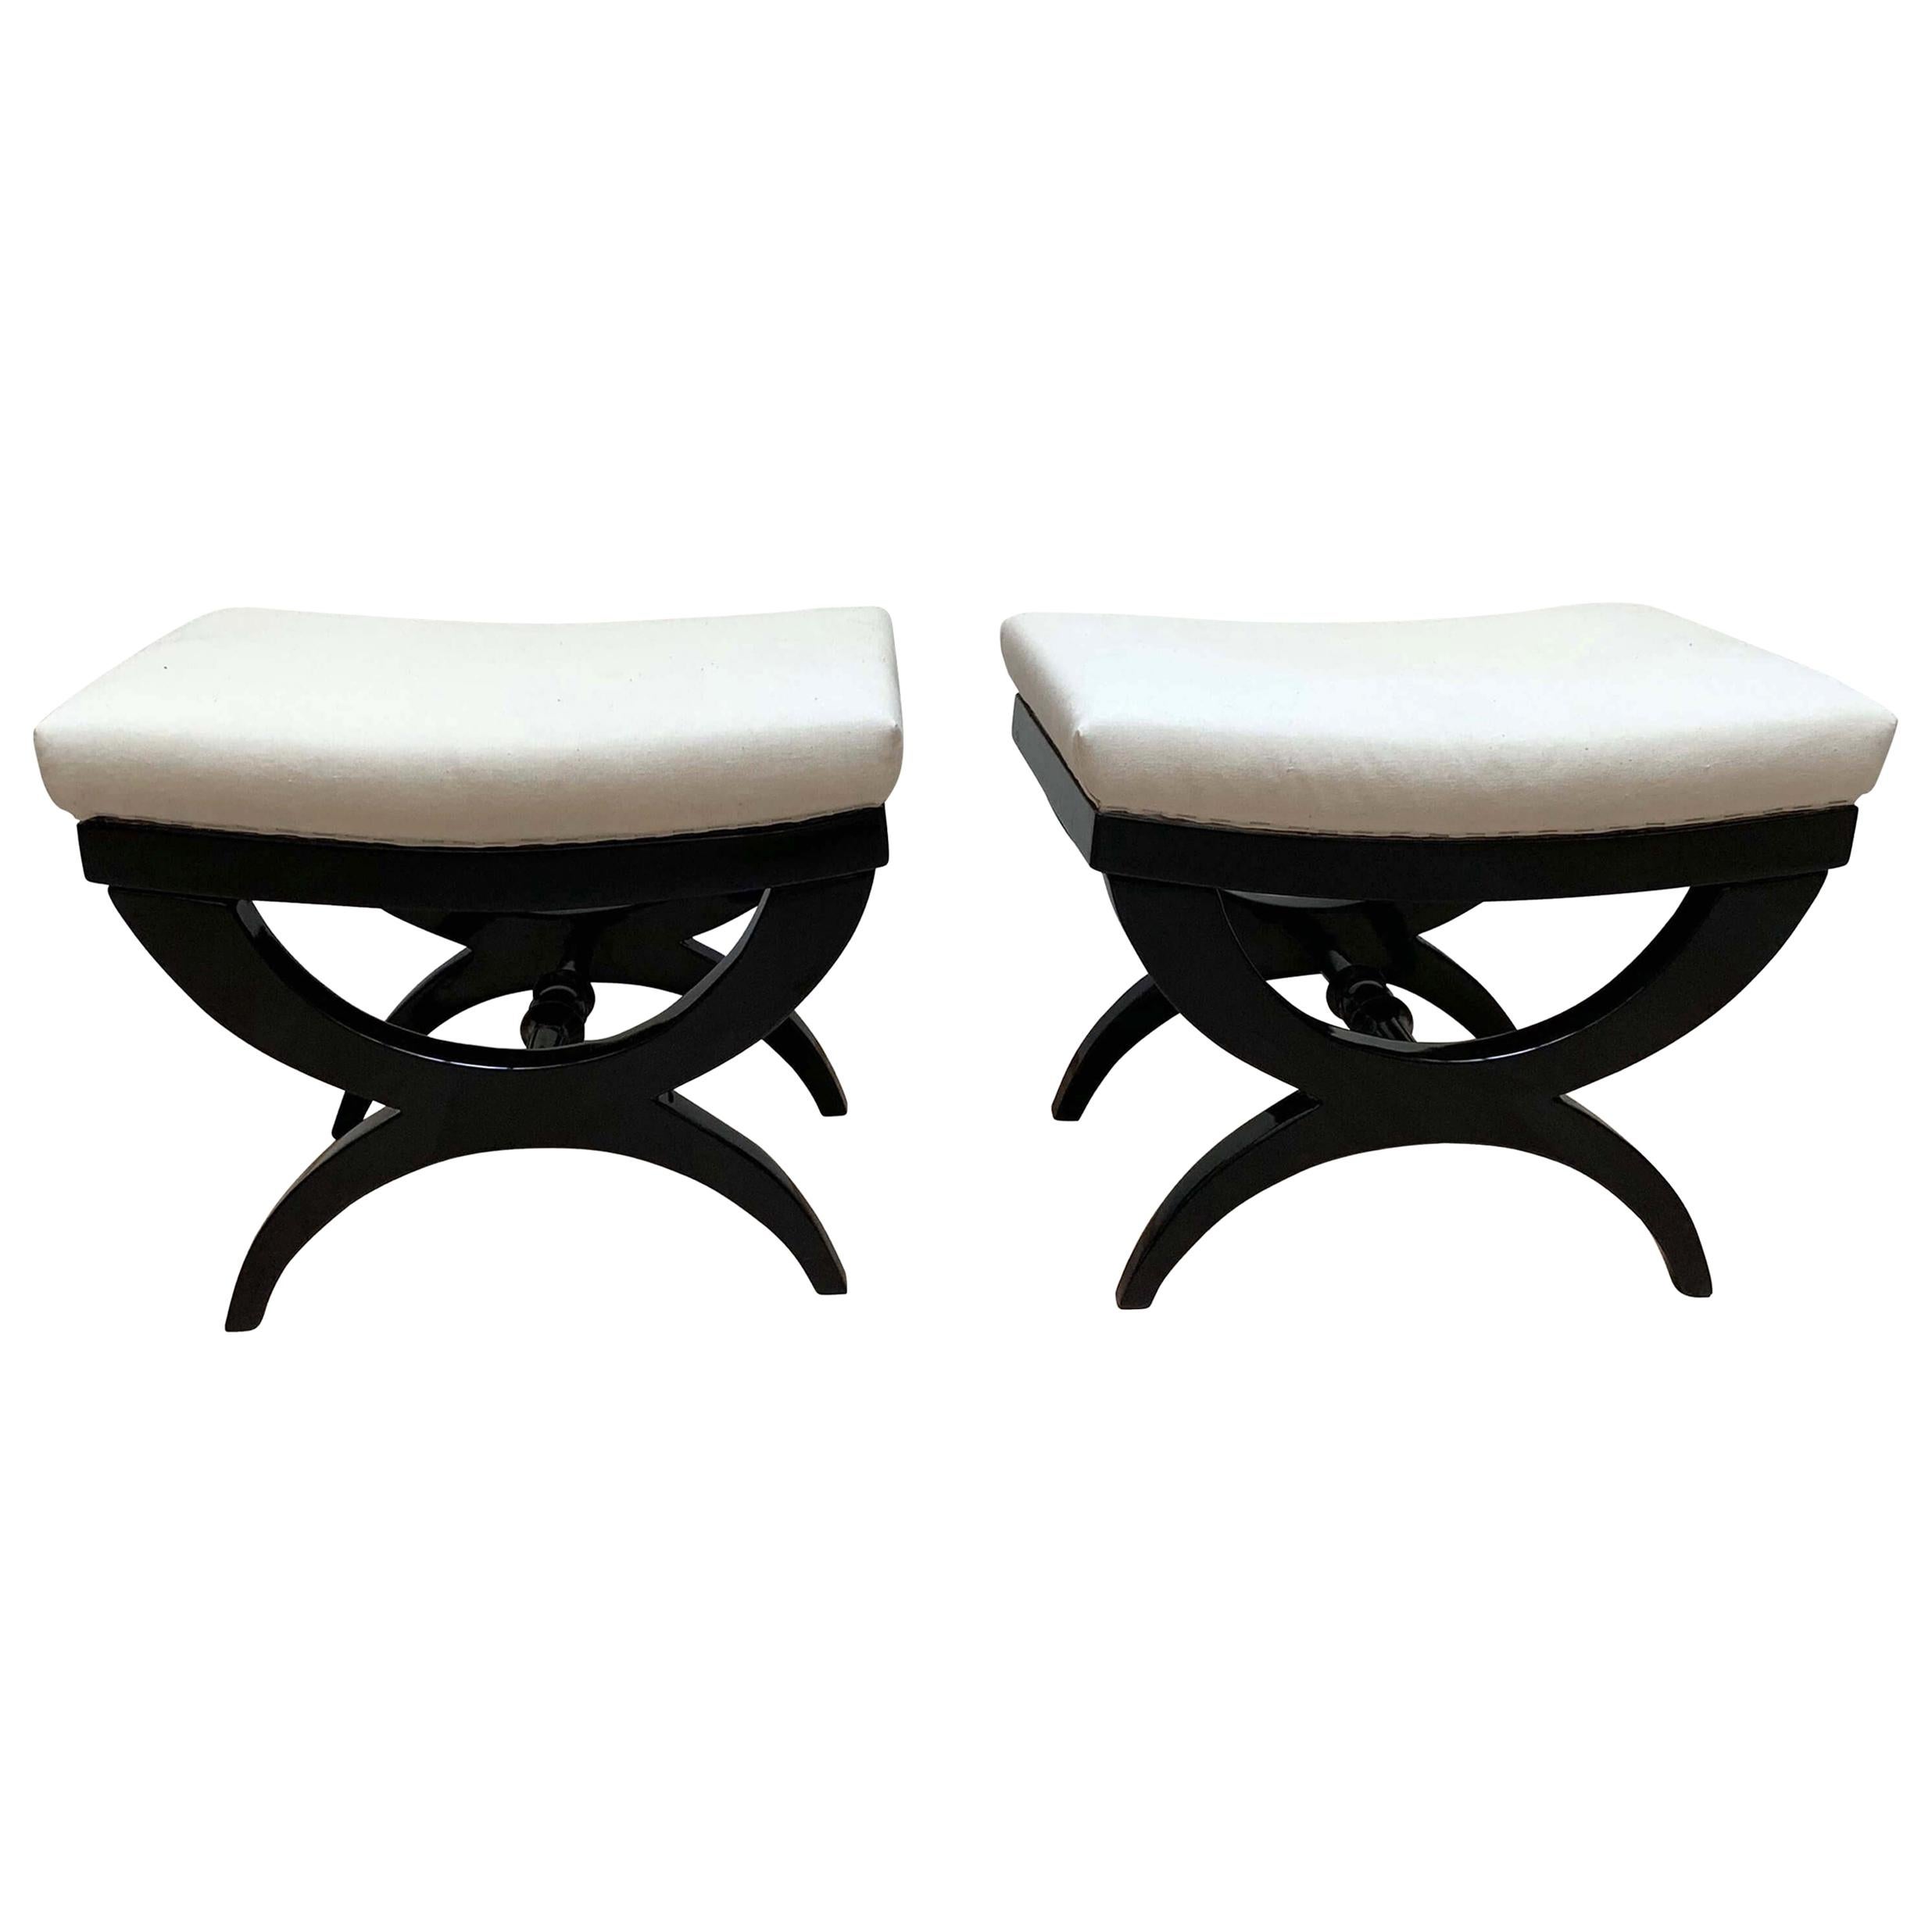 Pair of Art Deco Stools / Tabourets, Black Lacquer, France, circa 1940